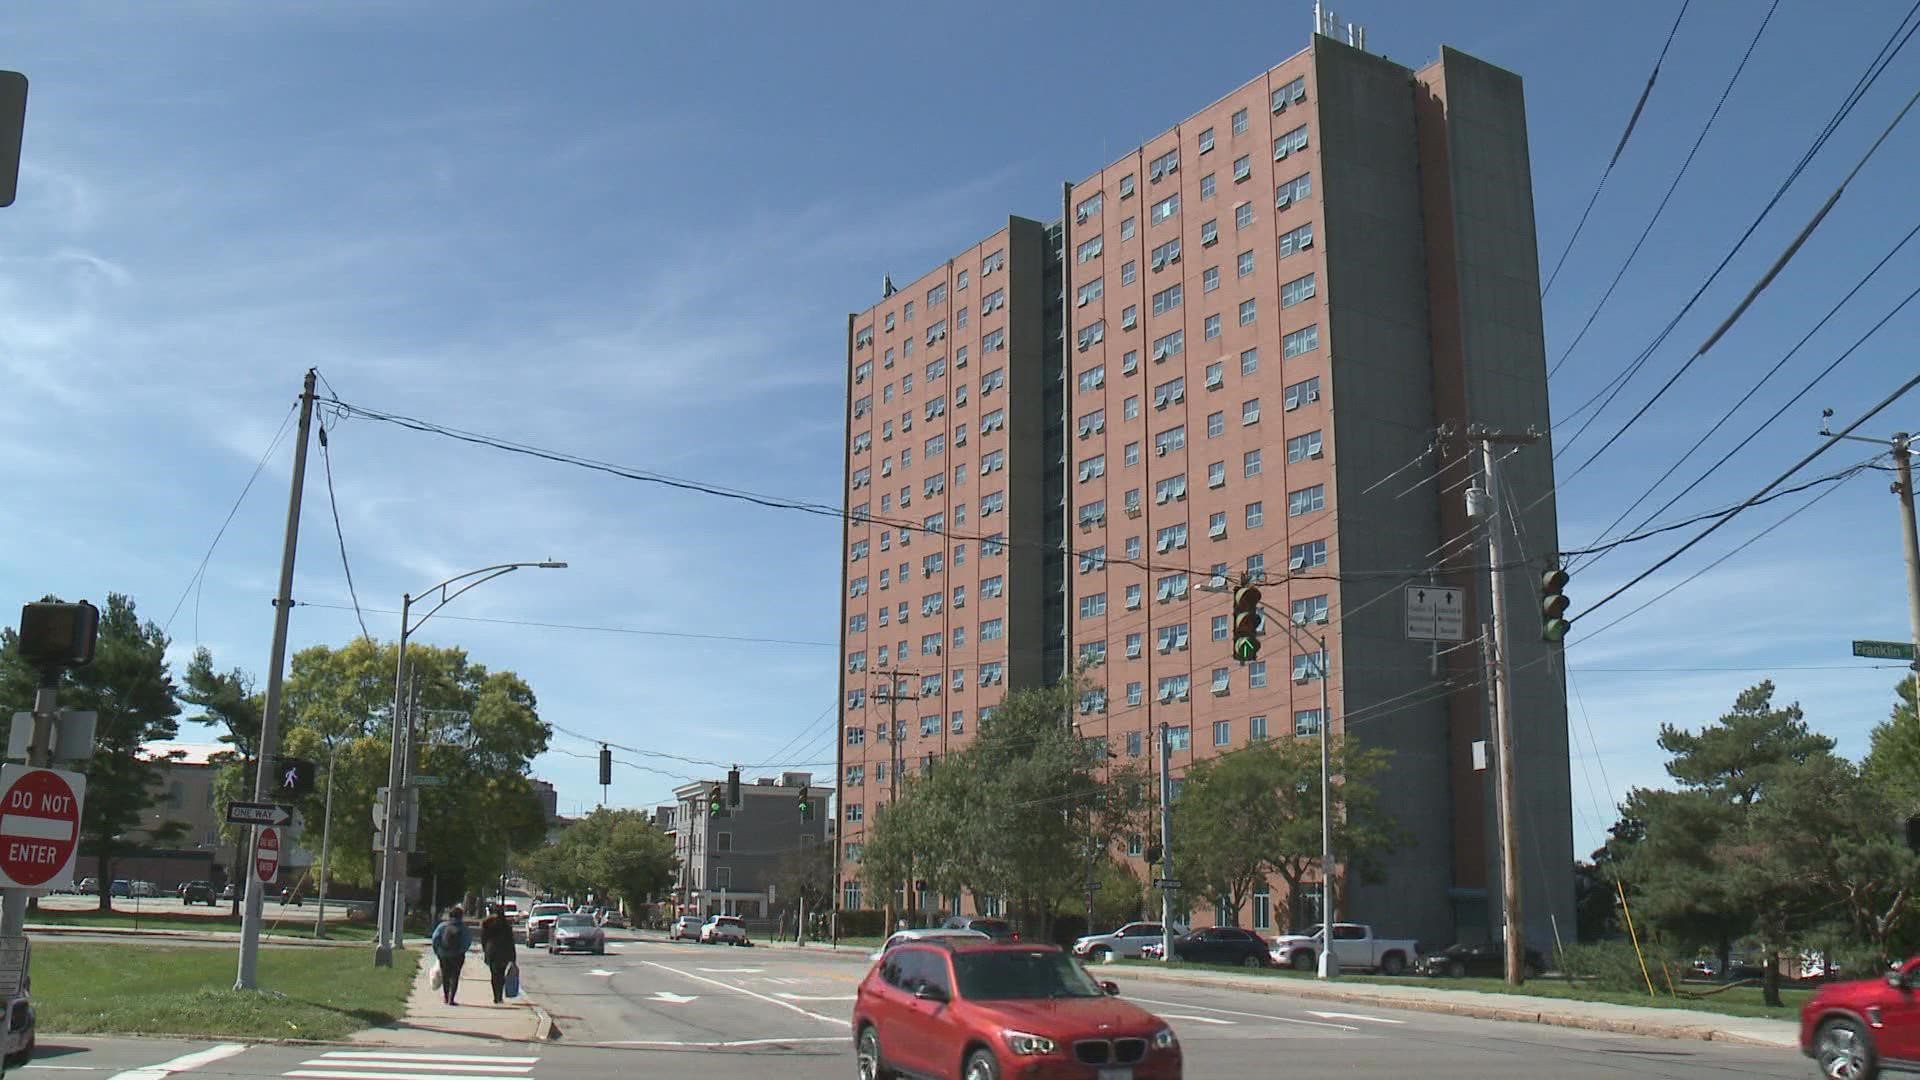 Floors 7 to 16 of the building have been without full power for three weeks after Portland Housing Authority officials said the apartment was struck by lightning.